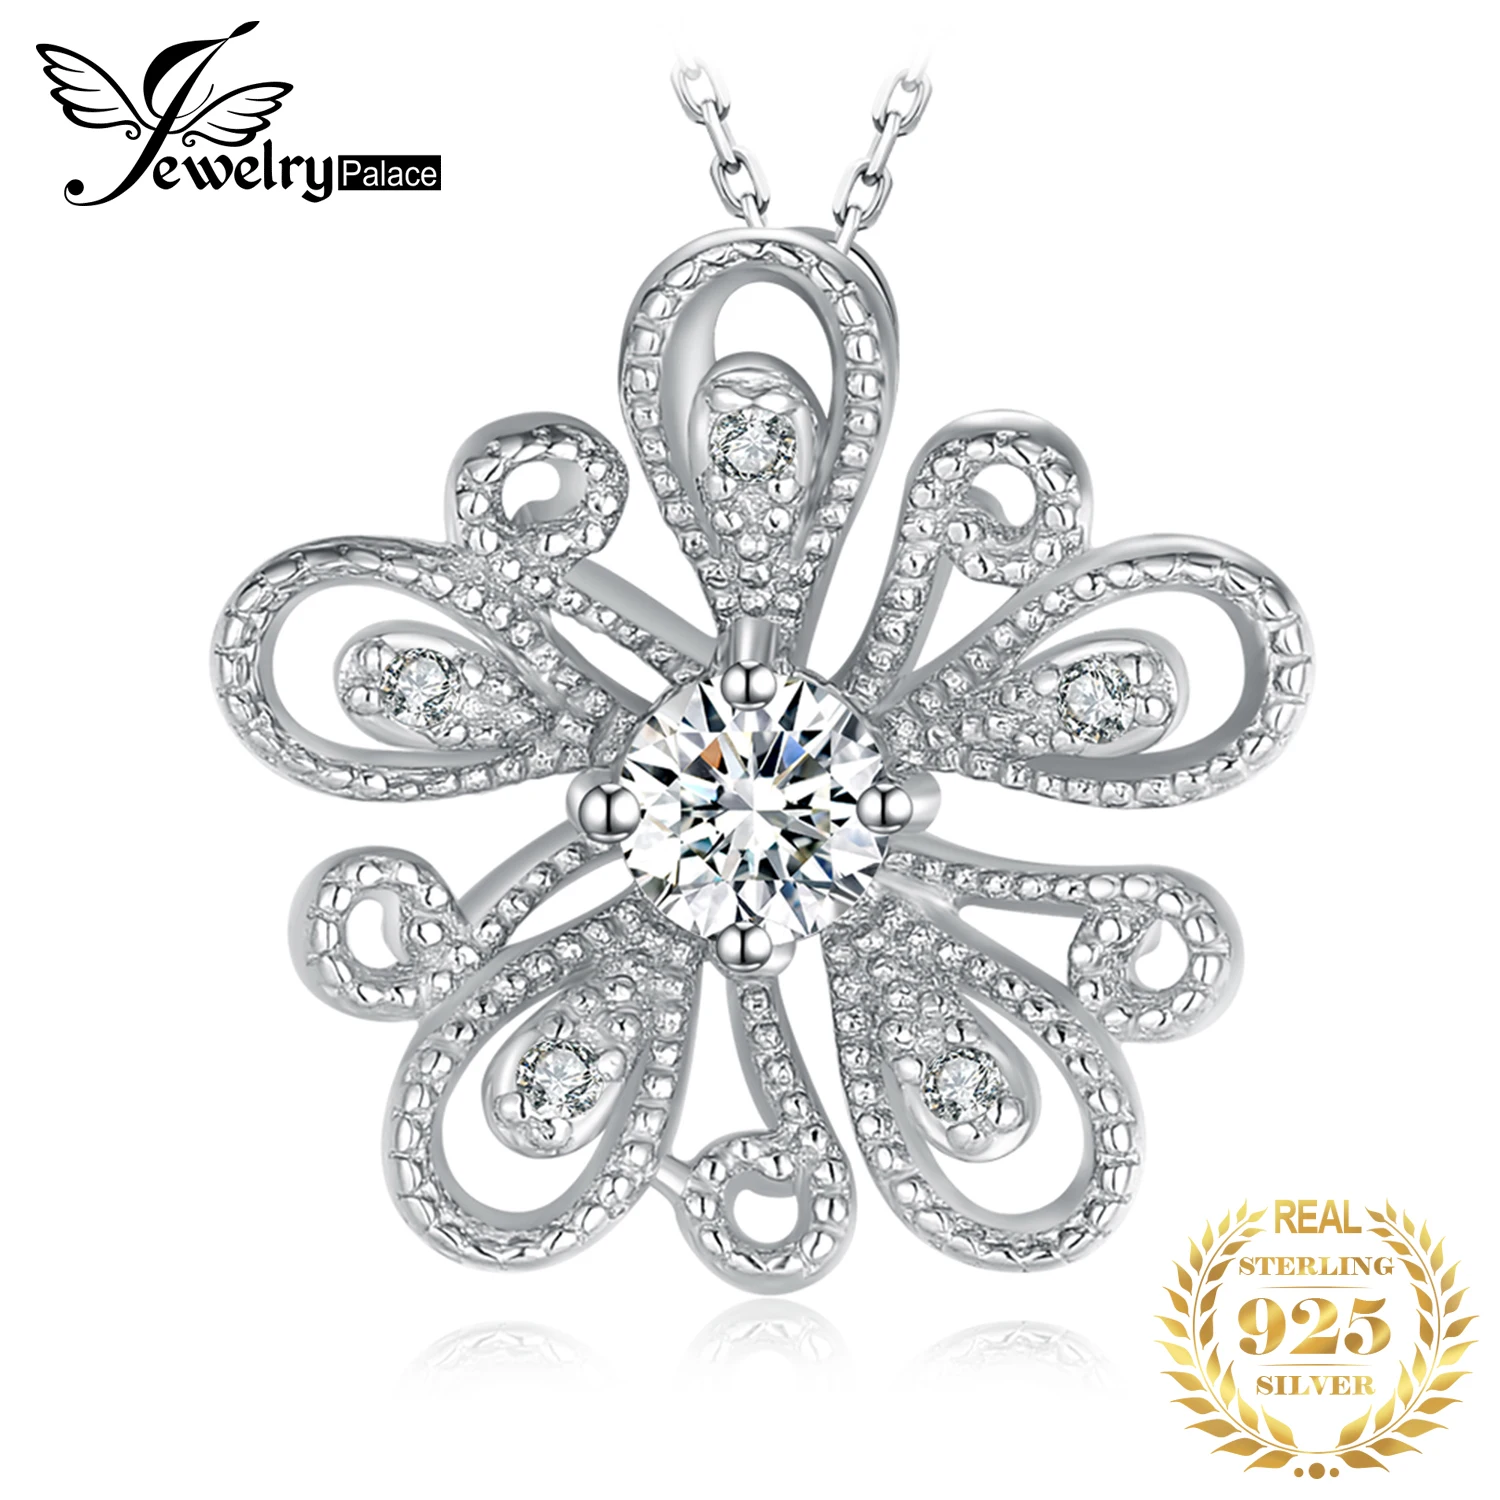 

JewelryPalace Flower 925 Sterling Silver Cubic Zirconia Necklace for Women Simulated Diamond Fashion Pendant Necklace No Chain